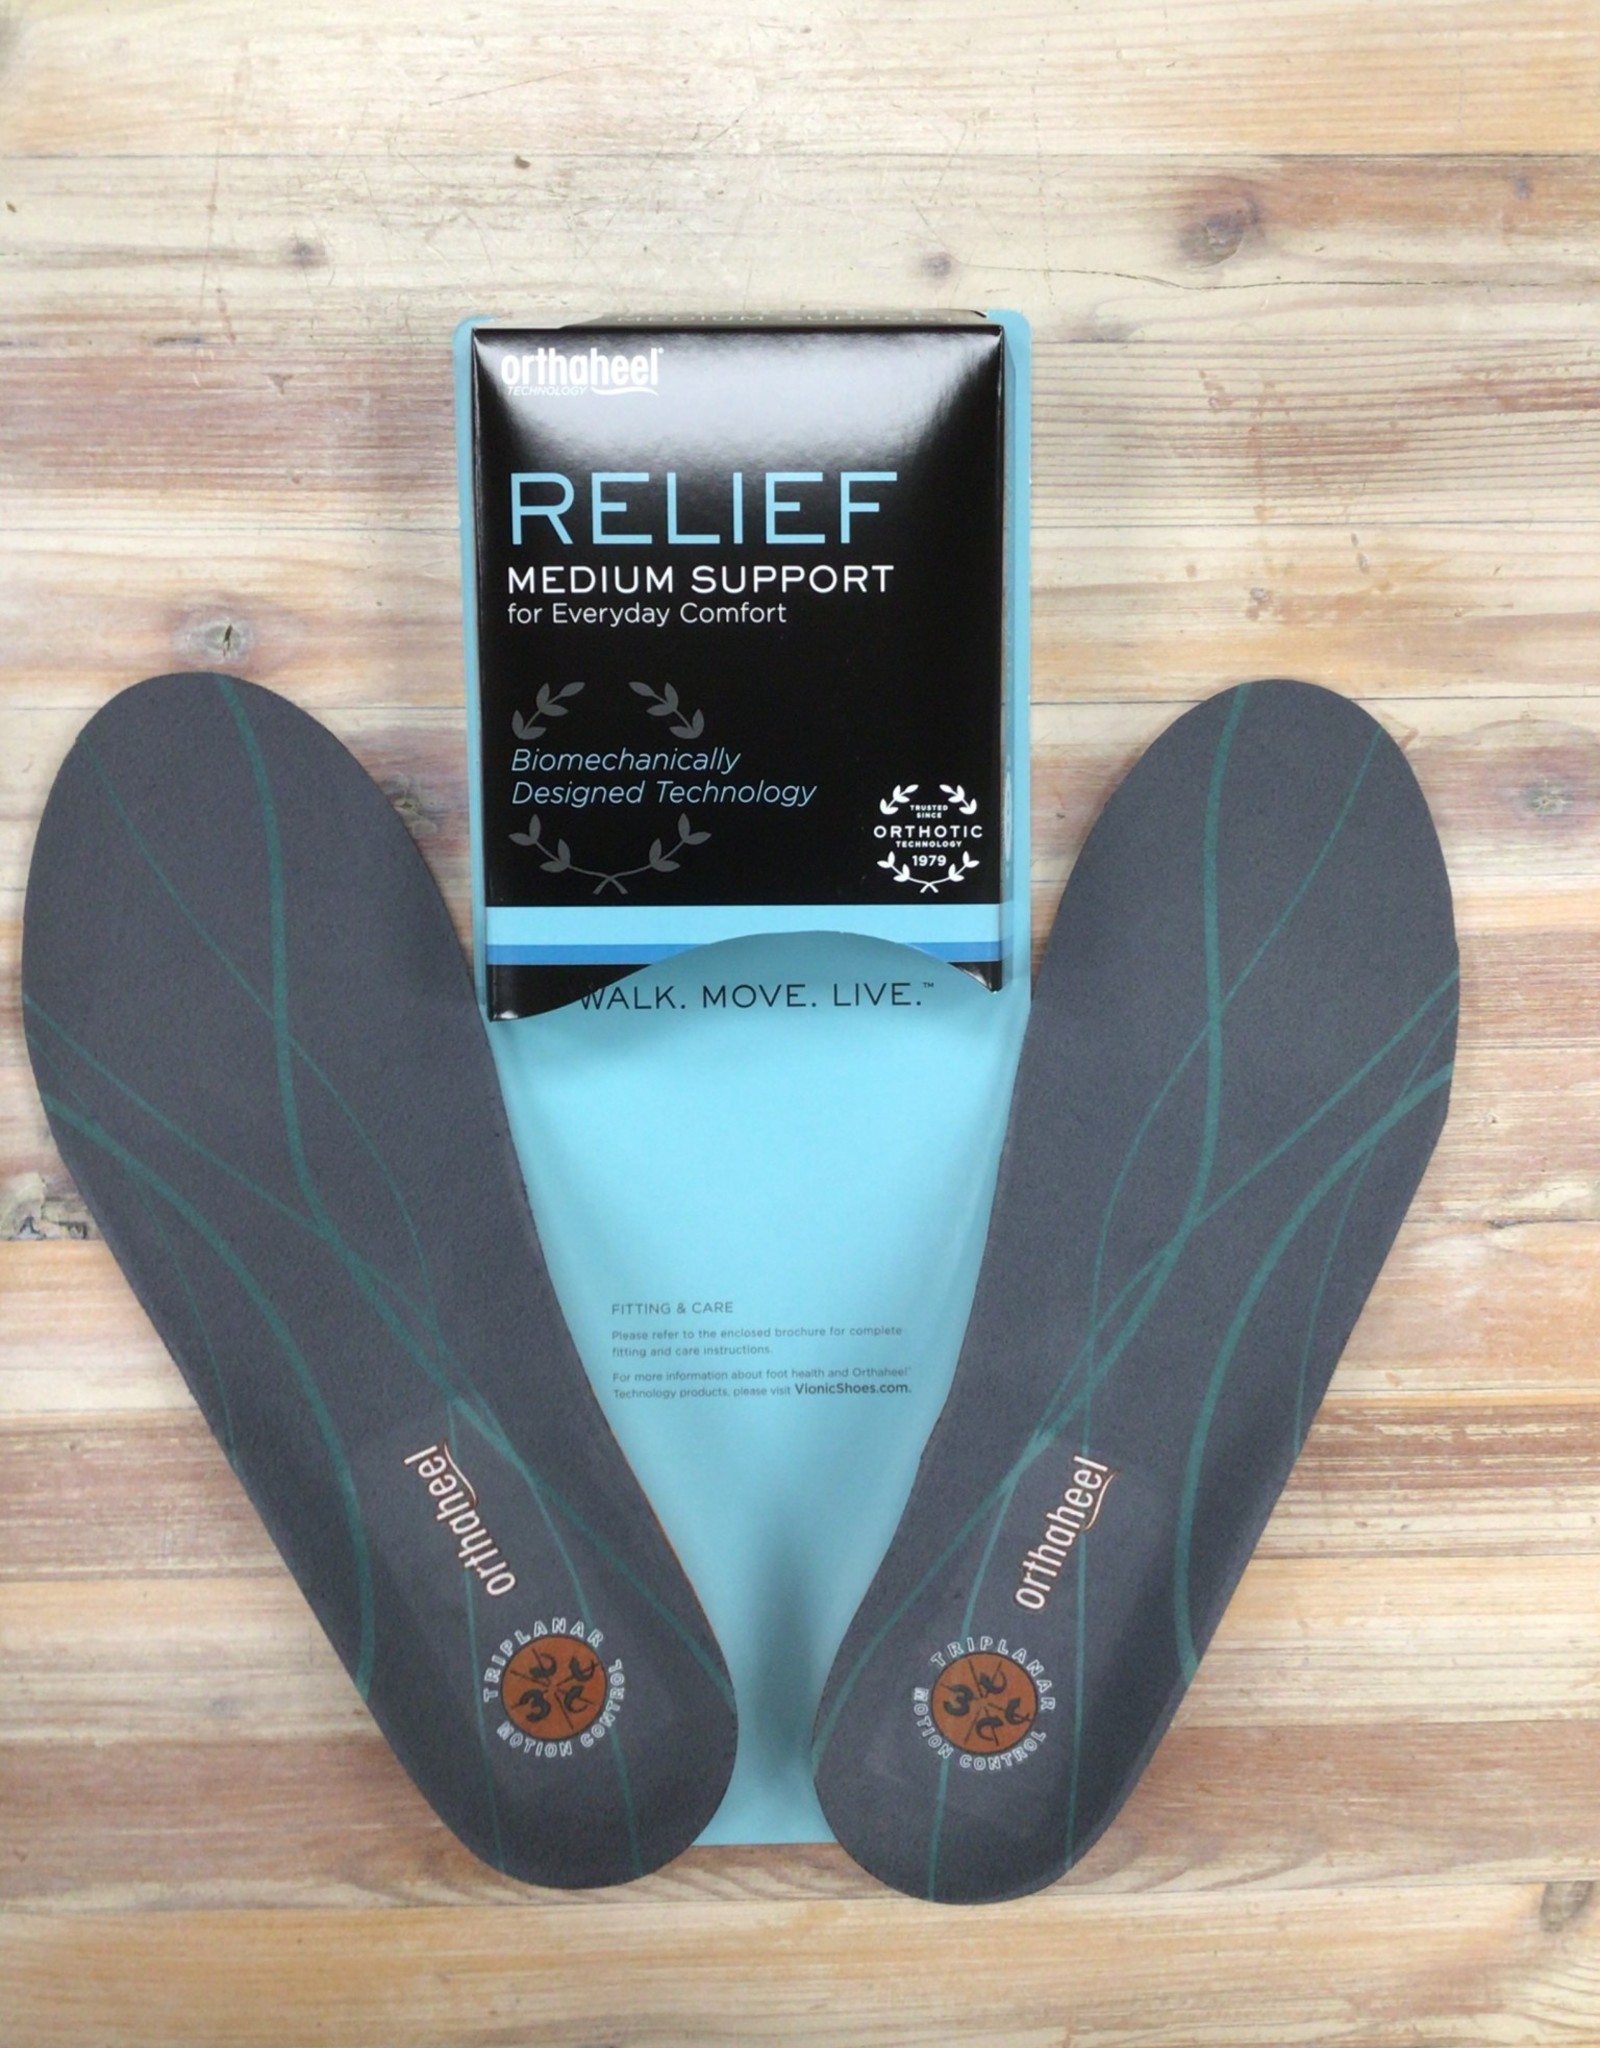 Vionic Vionic Relief Full Length Insole